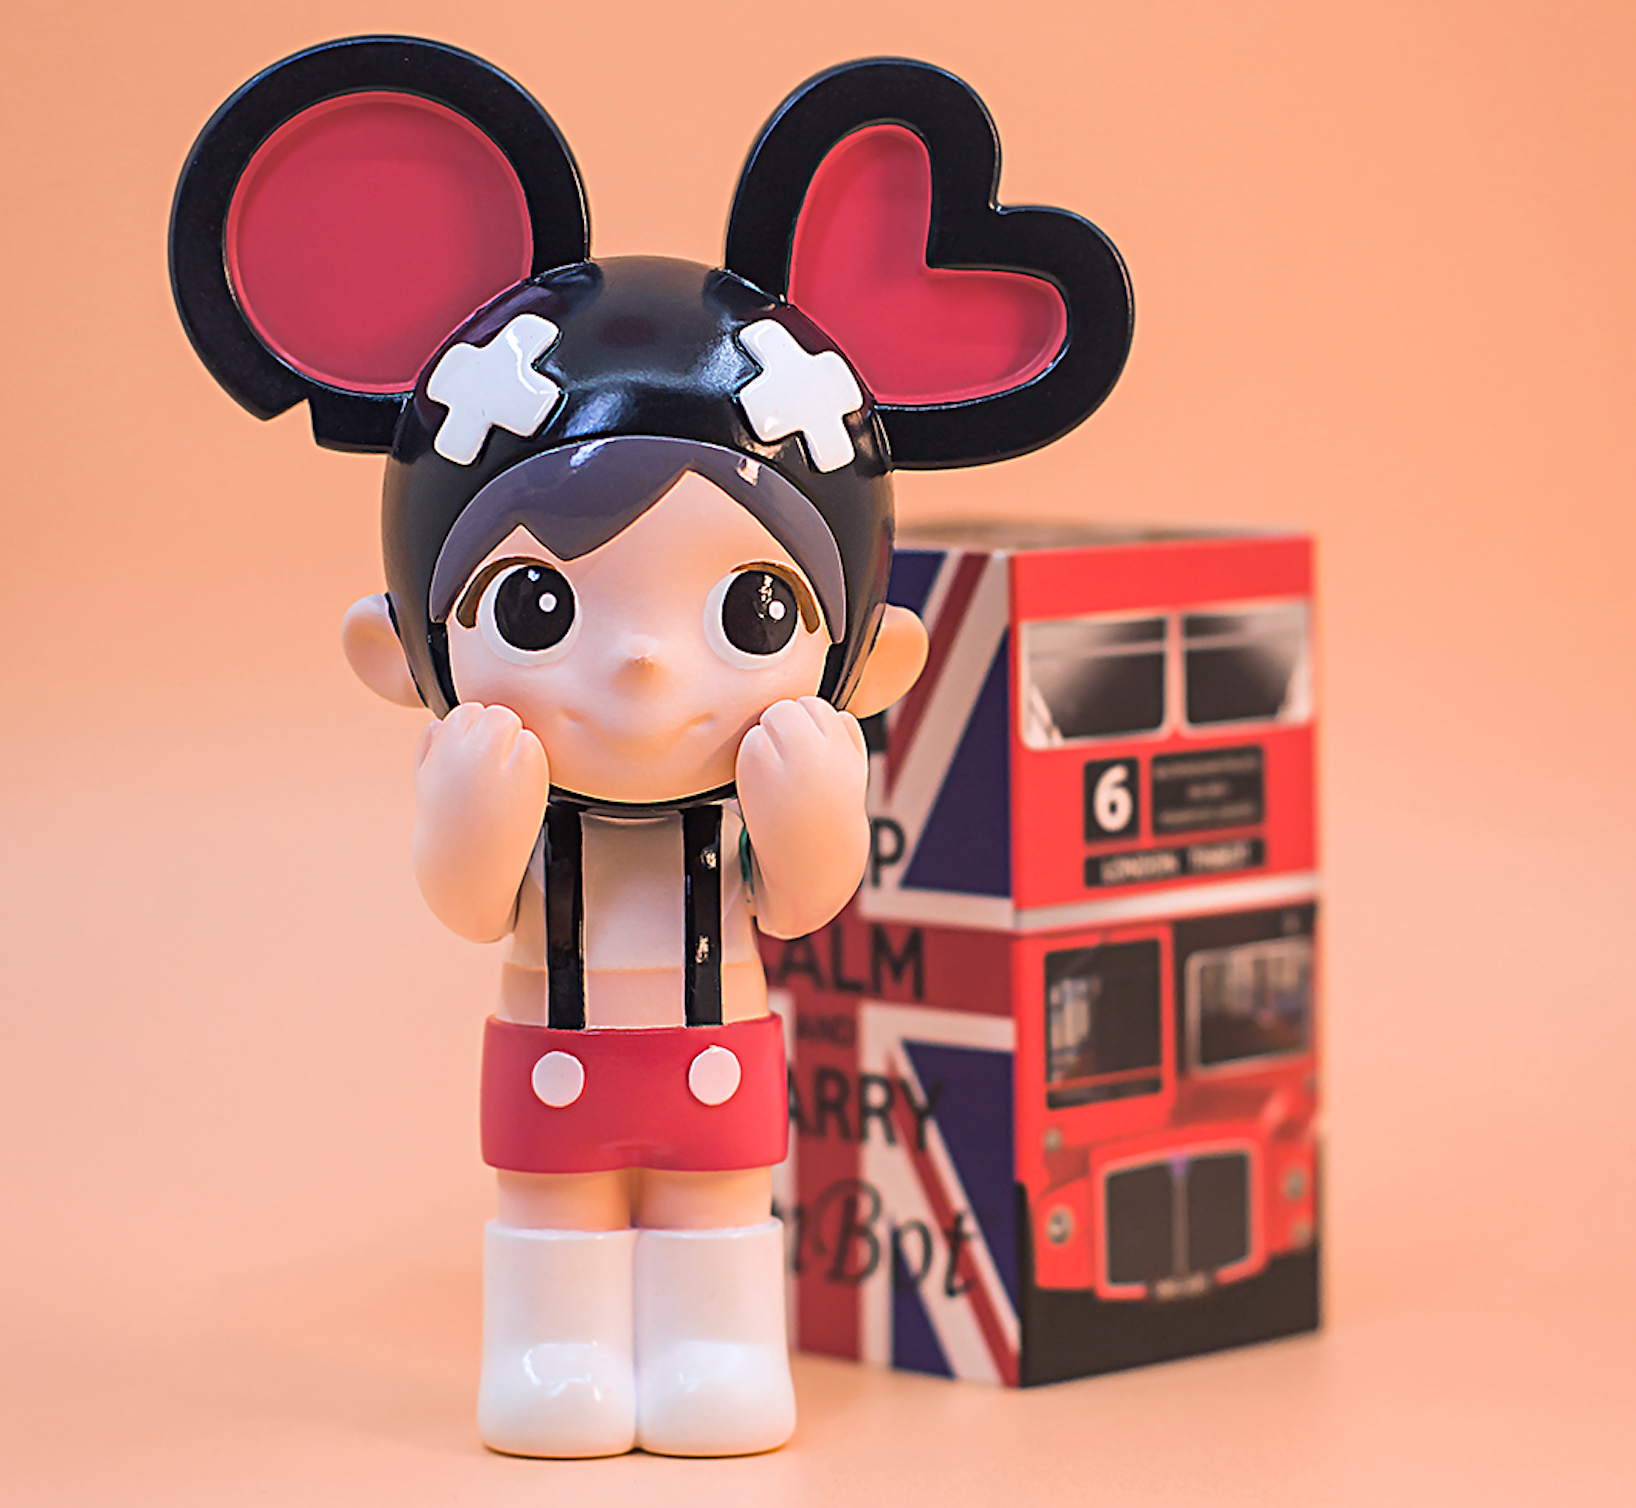 OTAKID Super DD Mouse Edition resin figure by Sank Toys Available Now ! ! !